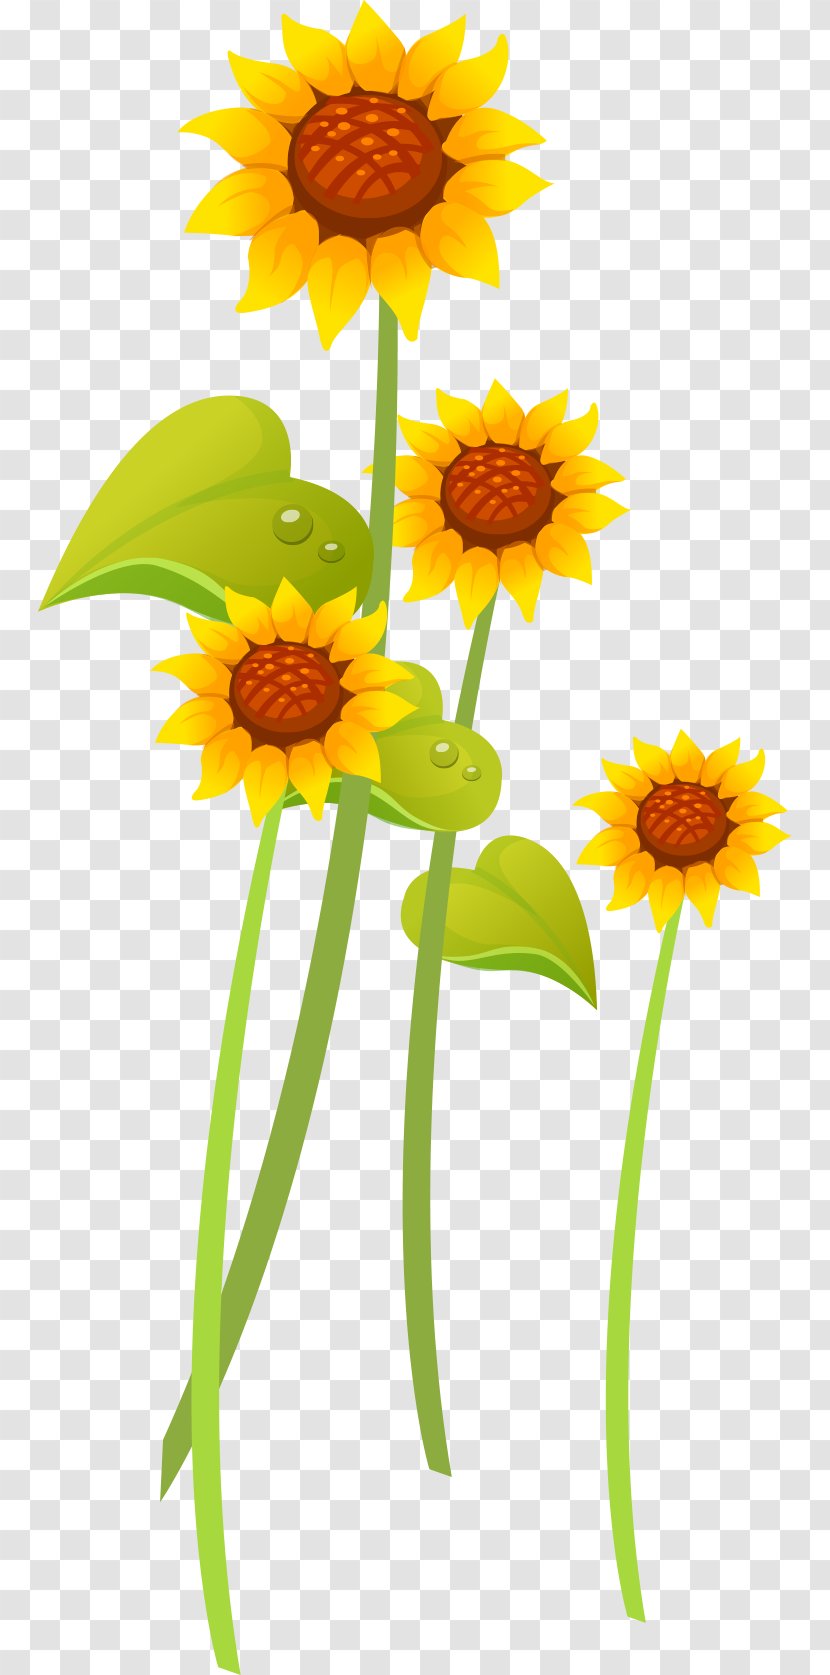 Common Sunflower - Plant - Yellow Sunflowers Transparent PNG